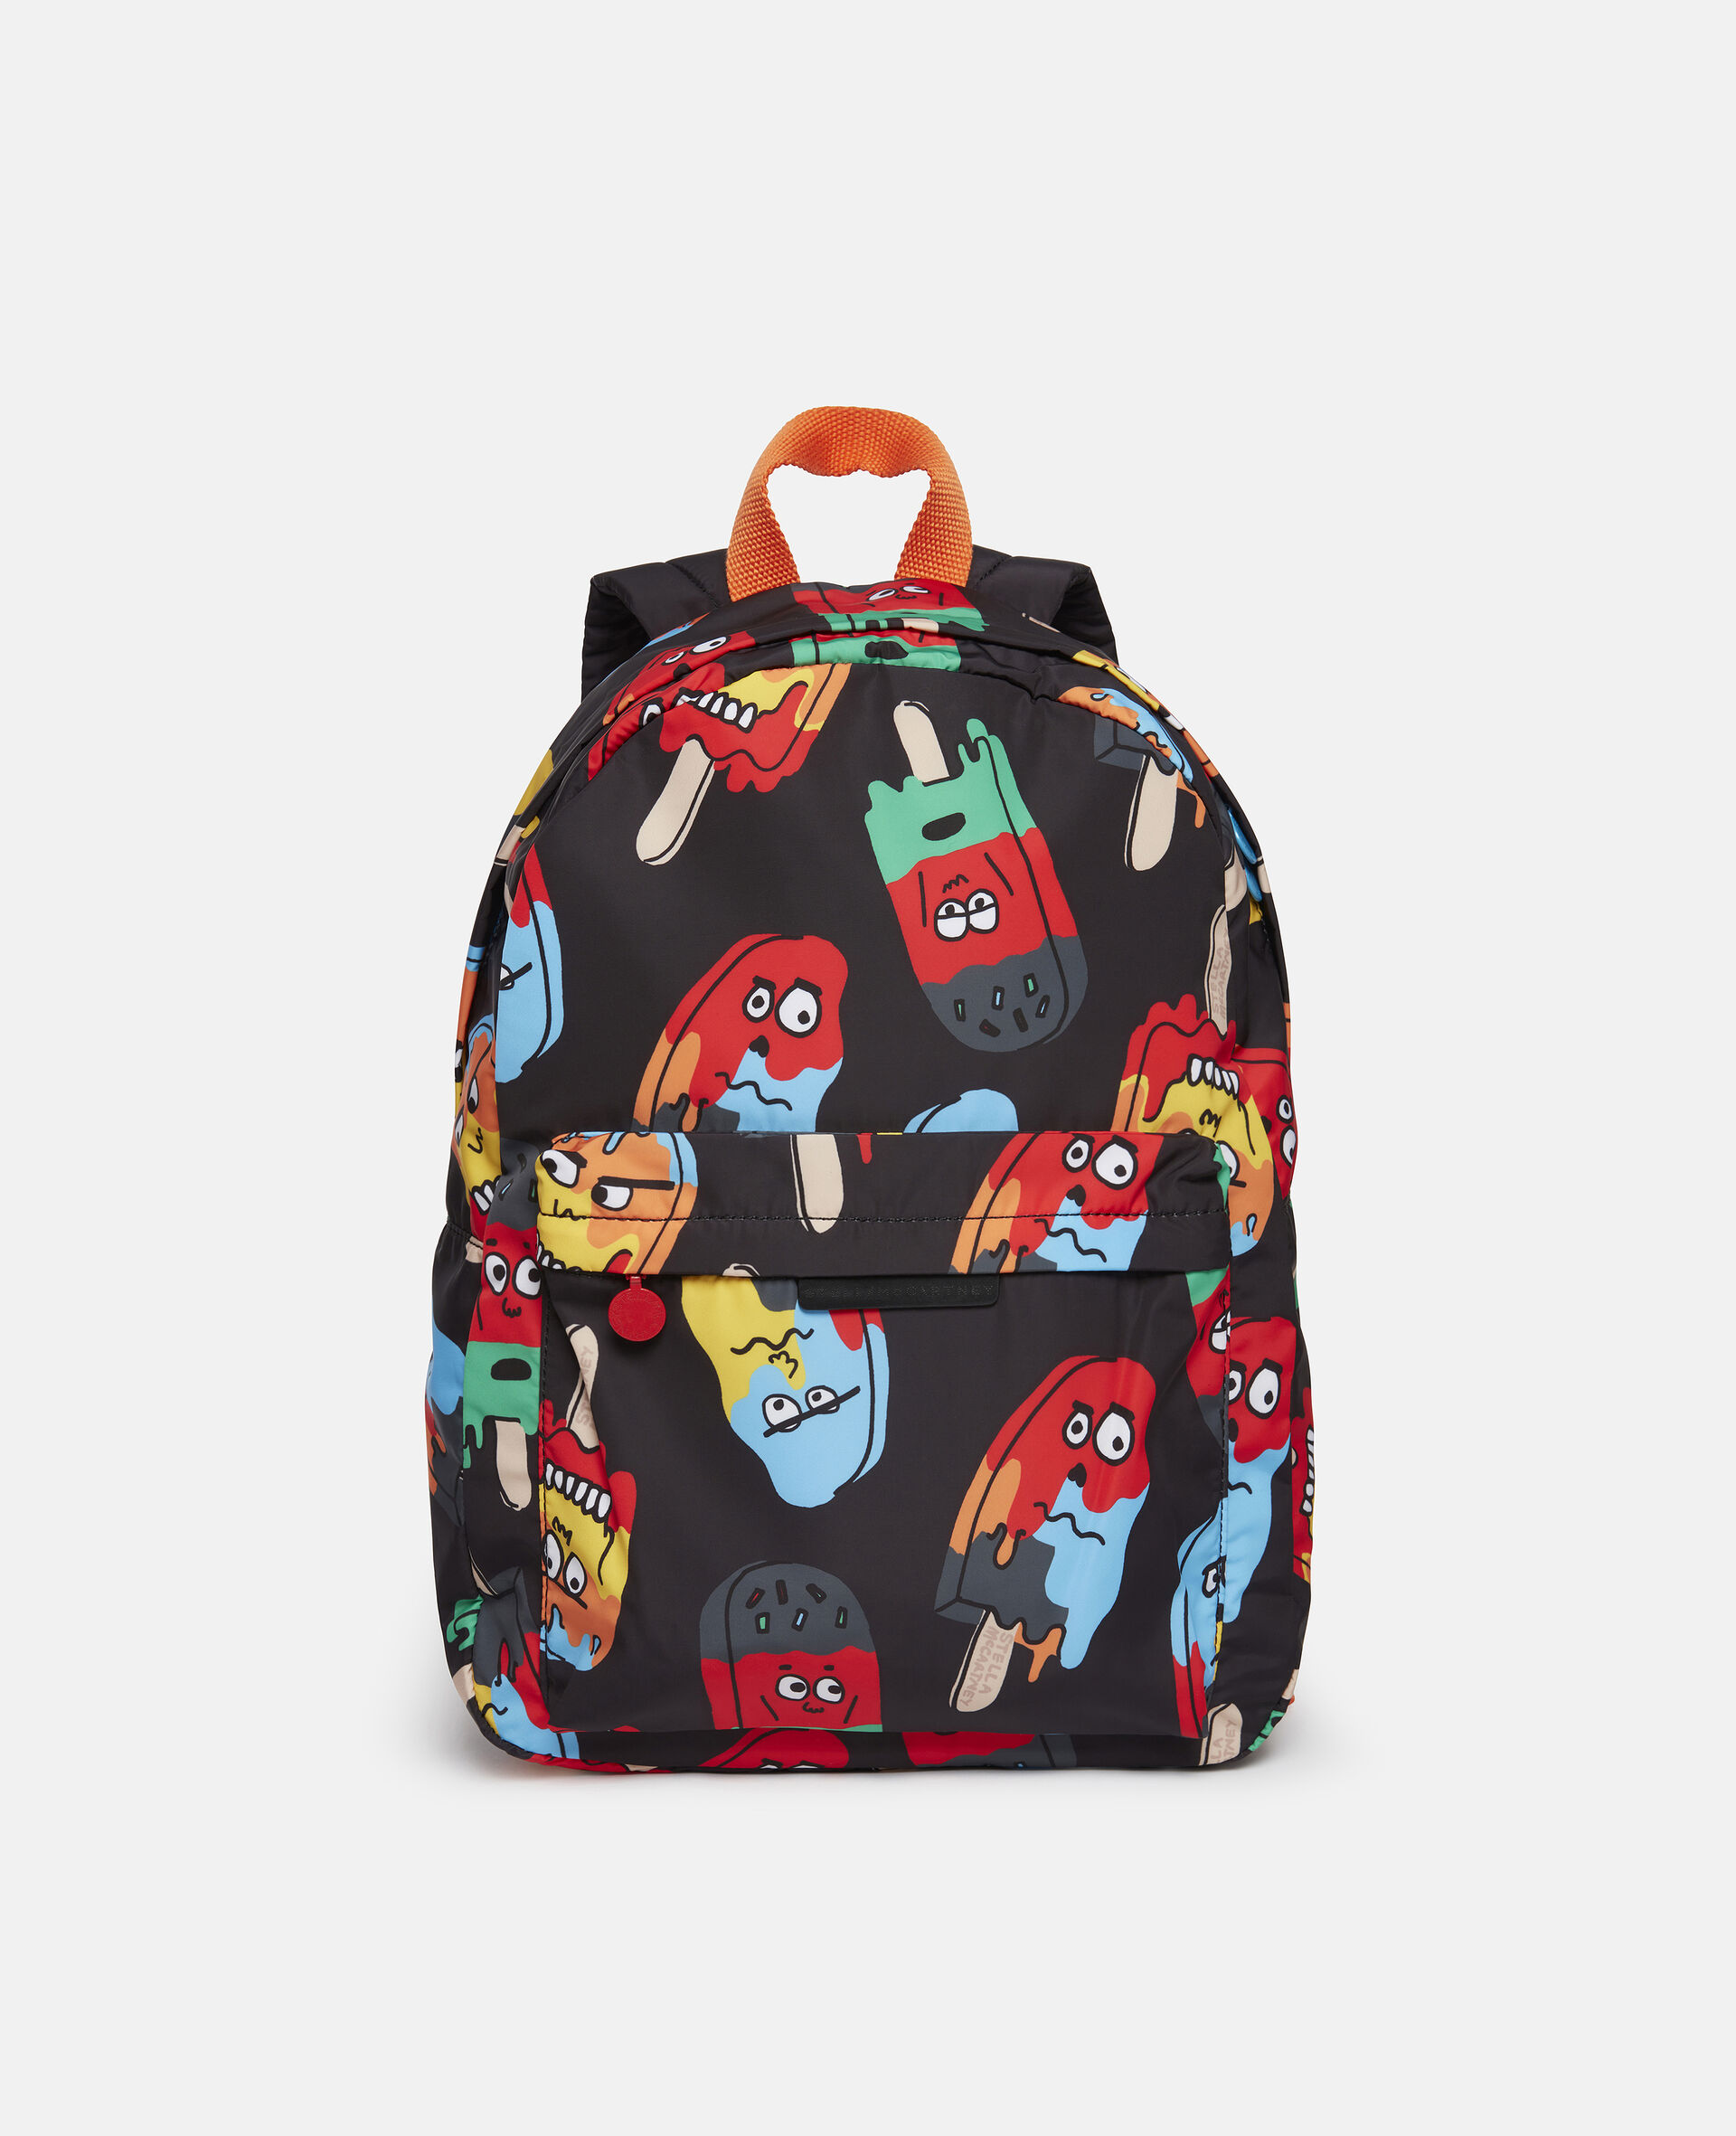 Ice lolly Backpack-Black-large image number 0